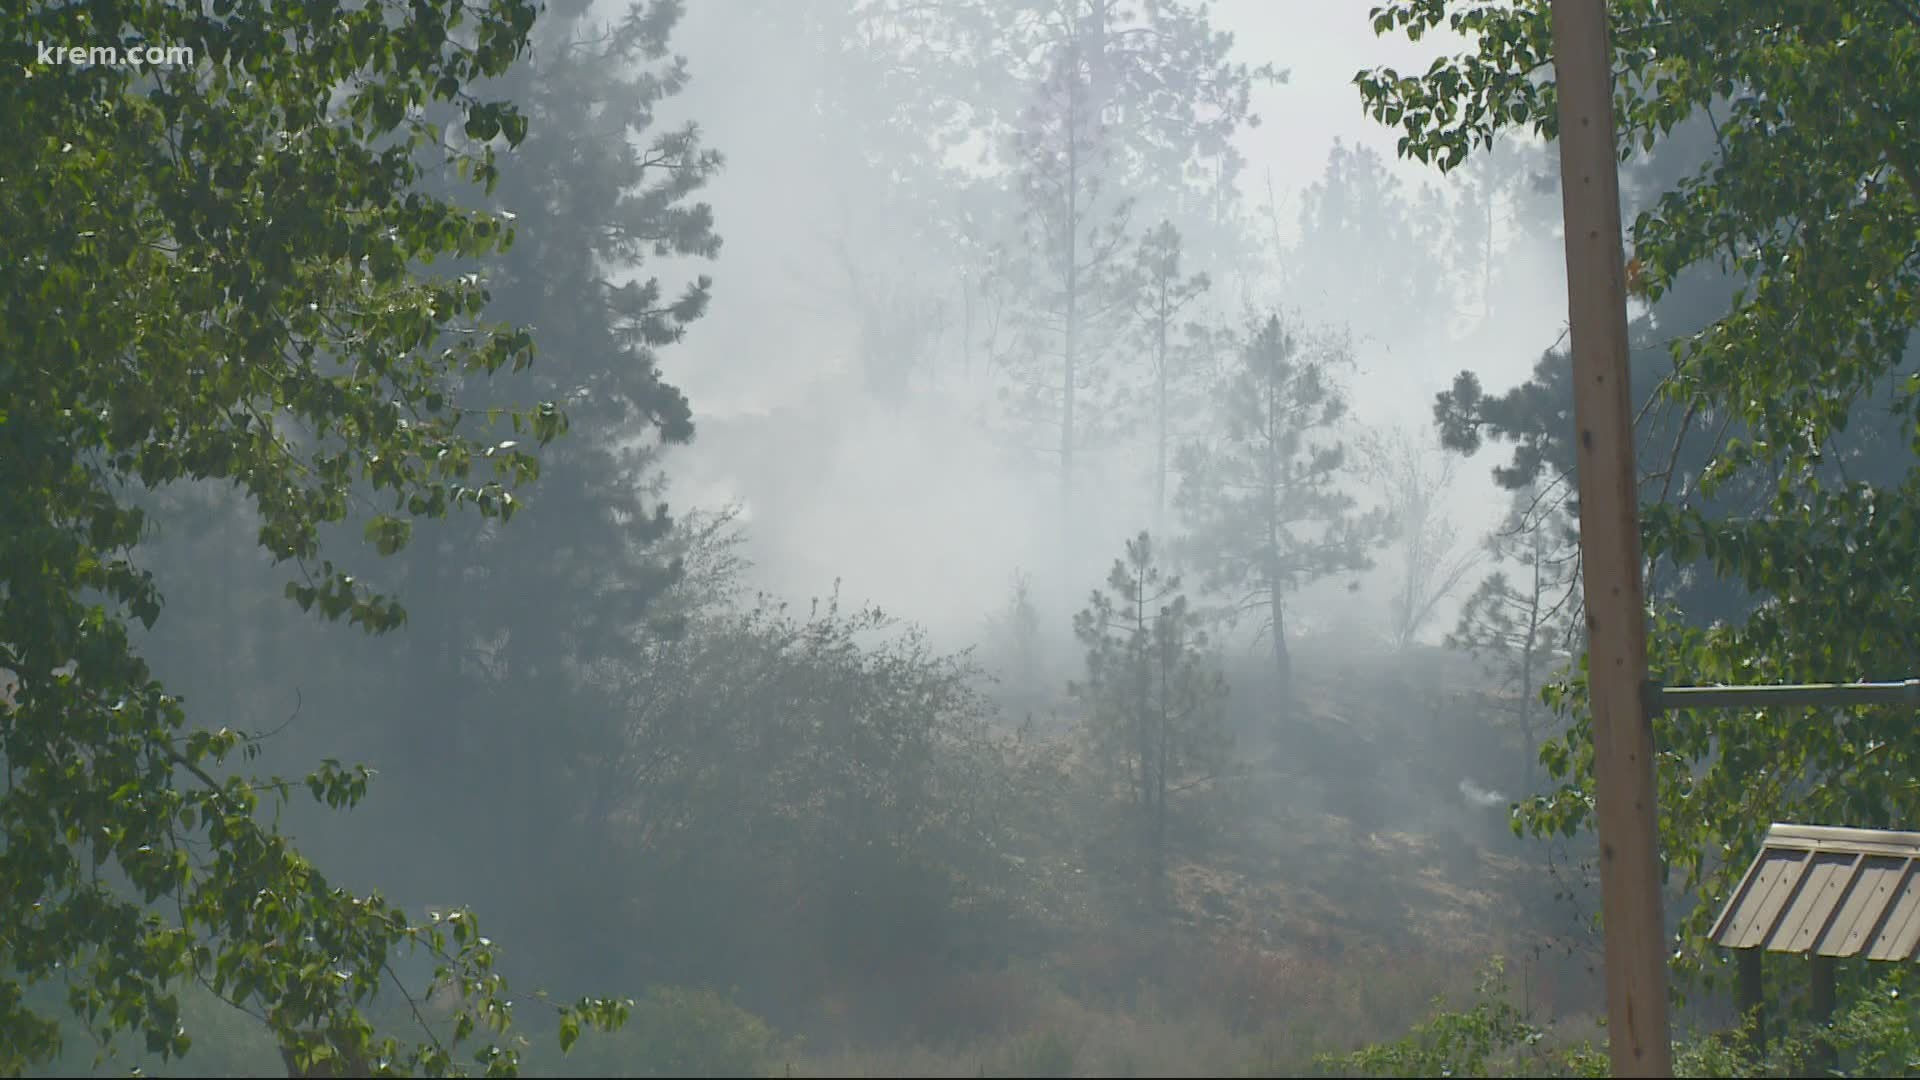 Fire crews responded to a one-acre brush fire that shut down Appleway Avenue.